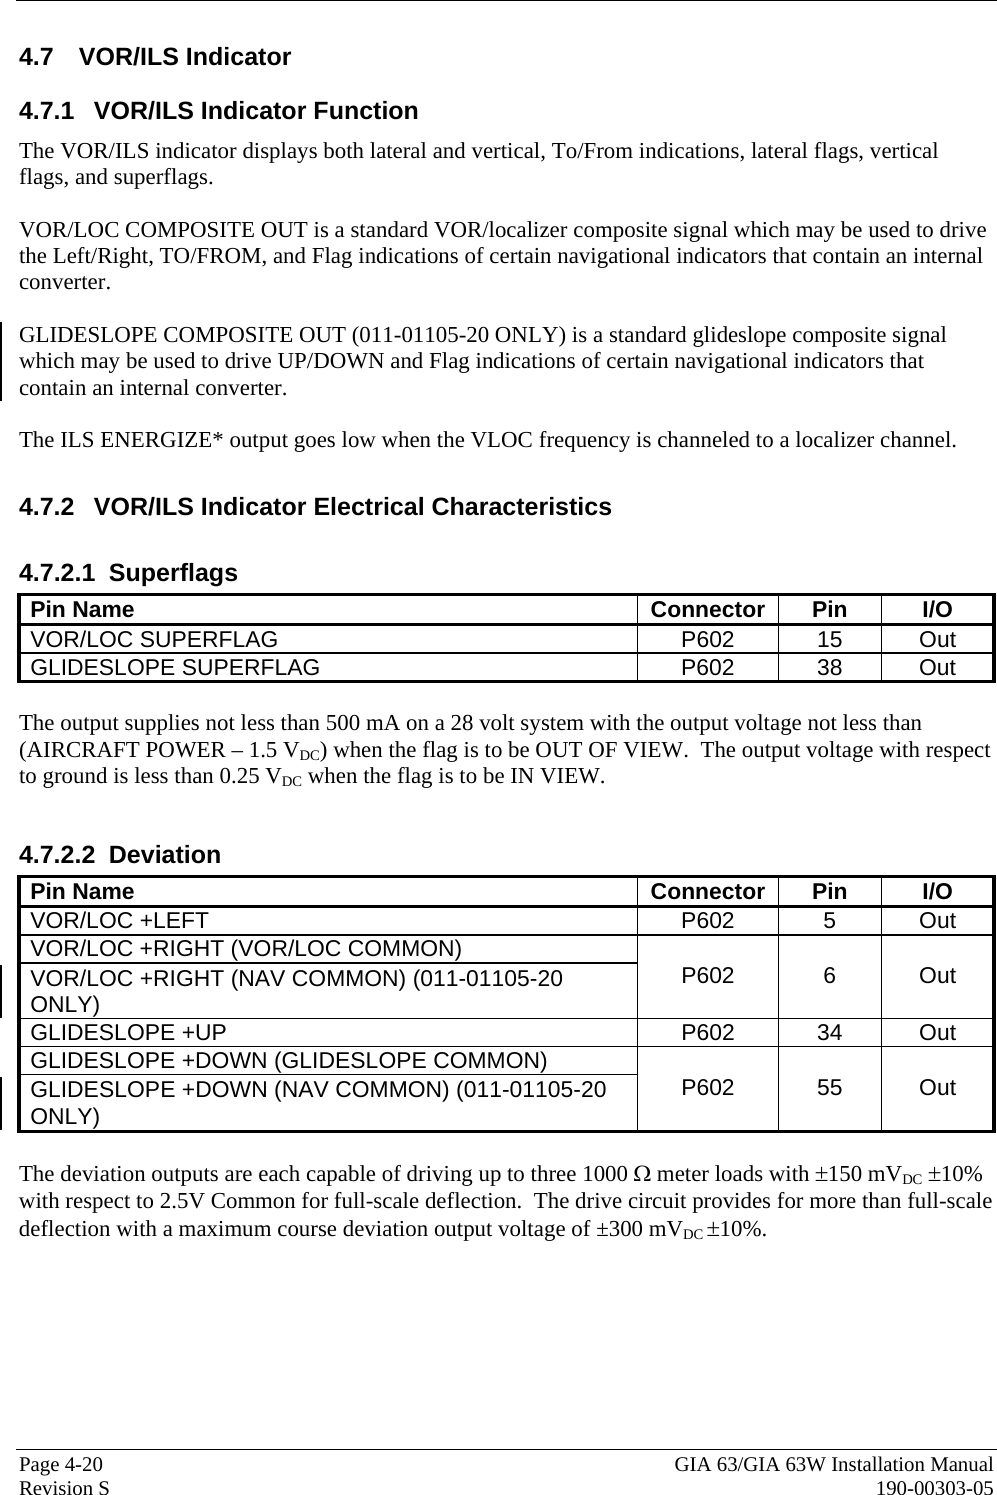  Page 4-20  GIA 63/GIA 63W Installation Manual Revision S  190-00303-05 4.7  VOR/ILS Indicator  4.7.1  VOR/ILS Indicator Function The VOR/ILS indicator displays both lateral and vertical, To/From indications, lateral flags, vertical flags, and superflags.    VOR/LOC COMPOSITE OUT is a standard VOR/localizer composite signal which may be used to drive the Left/Right, TO/FROM, and Flag indications of certain navigational indicators that contain an internal converter.  GLIDESLOPE COMPOSITE OUT (011-01105-20 ONLY) is a standard glideslope composite signal which may be used to drive UP/DOWN and Flag indications of certain navigational indicators that contain an internal converter.  The ILS ENERGIZE* output goes low when the VLOC frequency is channeled to a localizer channel.  4.7.2 VOR/ILS Indicator Electrical Characteristics 4.7.2.1 Superflags  Pin Name  Connector  Pin  I/O VOR/LOC SUPERFLAG  P602  15  Out GLIDESLOPE SUPERFLAG  P602  38  Out  The output supplies not less than 500 mA on a 28 volt system with the output voltage not less than (AIRCRAFT POWER – 1.5 VDC) when the flag is to be OUT OF VIEW.  The output voltage with respect to ground is less than 0.25 VDC when the flag is to be IN VIEW.  4.7.2.2 Deviation Pin Name  Connector  Pin  I/O VOR/LOC +LEFT  P602  5  Out VOR/LOC +RIGHT (VOR/LOC COMMON) VOR/LOC +RIGHT (NAV COMMON) (011-01105-20 ONLY) P602 6 Out GLIDESLOPE +UP  P602  34  Out GLIDESLOPE +DOWN (GLIDESLOPE COMMON) GLIDESLOPE +DOWN (NAV COMMON) (011-01105-20 ONLY) P602 55 Out  The deviation outputs are each capable of driving up to three 1000 Ω meter loads with ±150 mVDC ±10% with respect to 2.5V Common for full-scale deflection.  The drive circuit provides for more than full-scale deflection with a maximum course deviation output voltage of ±300 mVDC ±10%. 